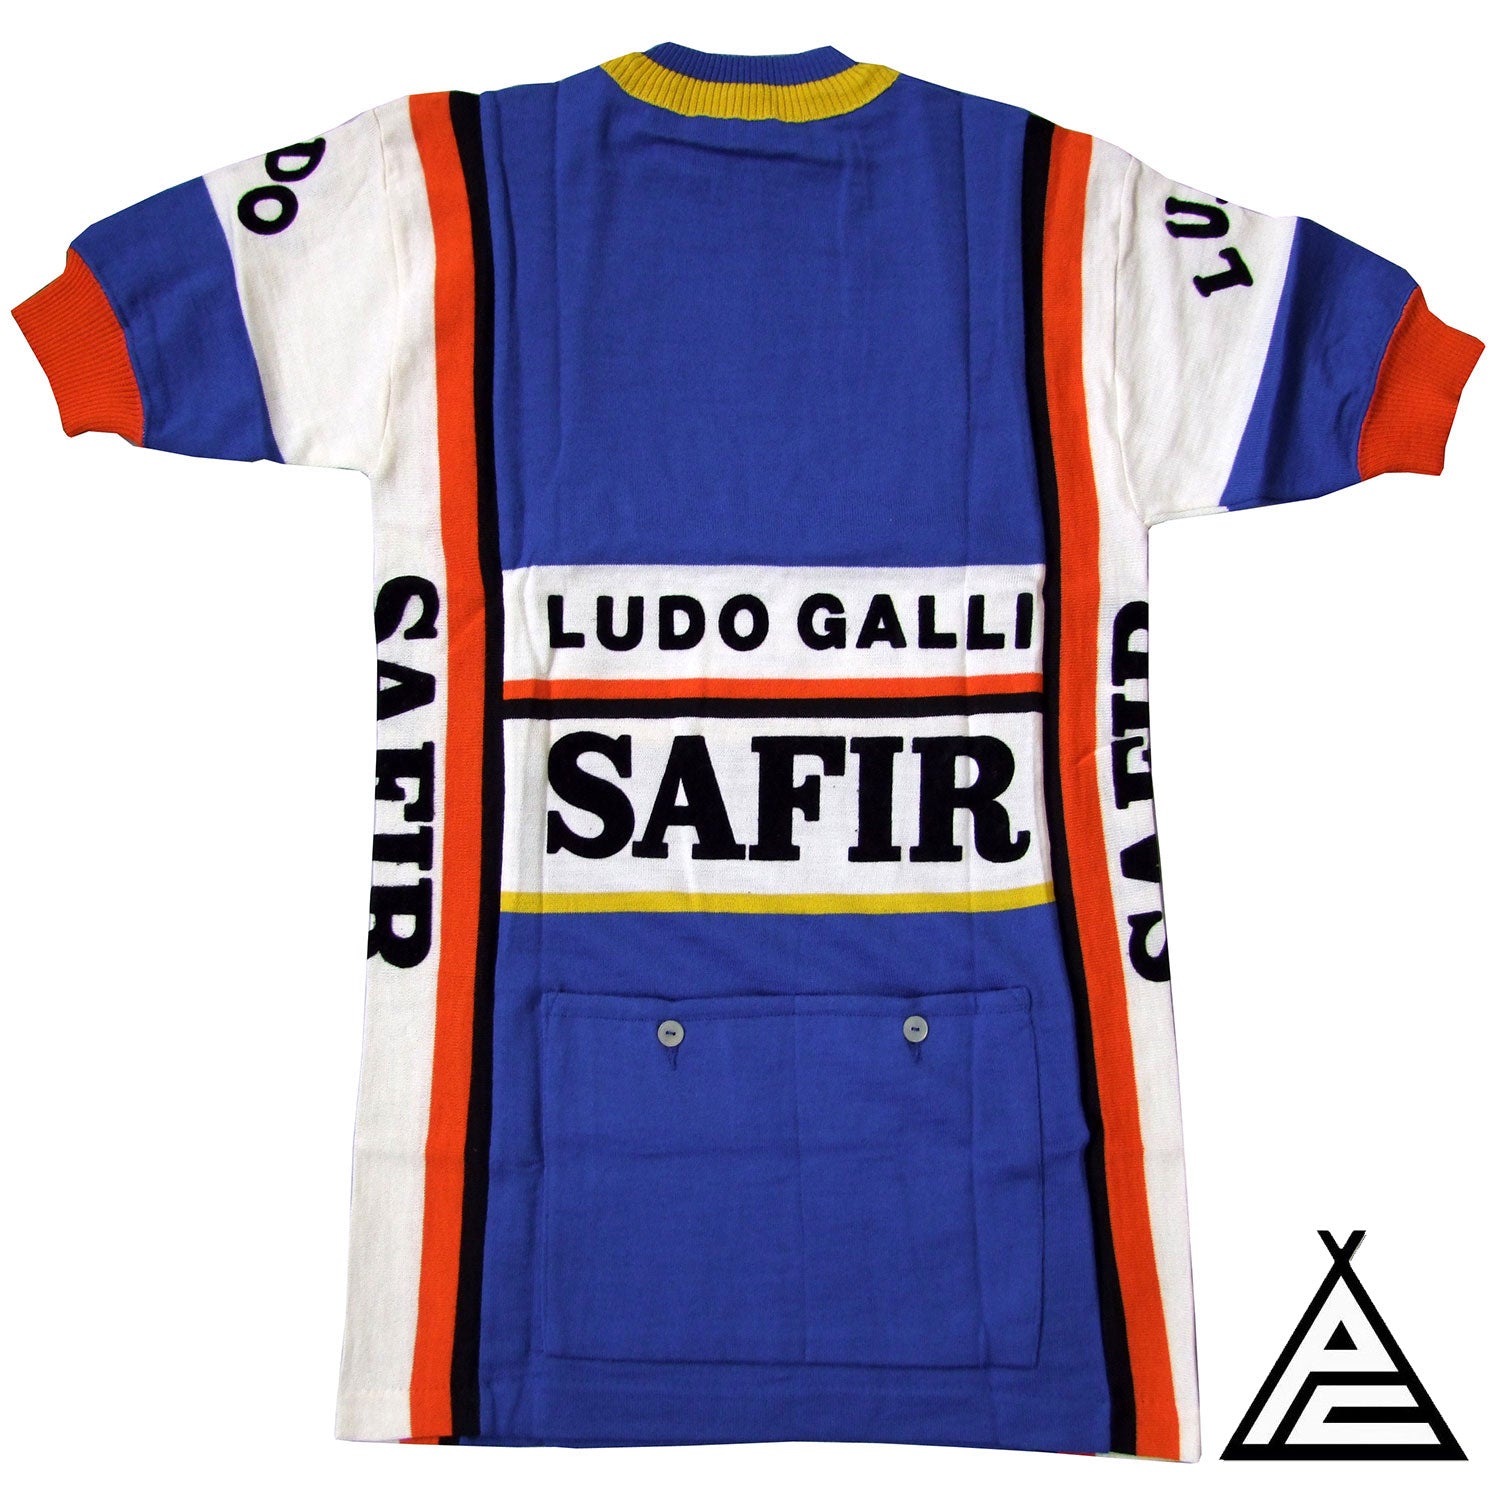 The back of the 1981 Safir Ludo Galli team jersey